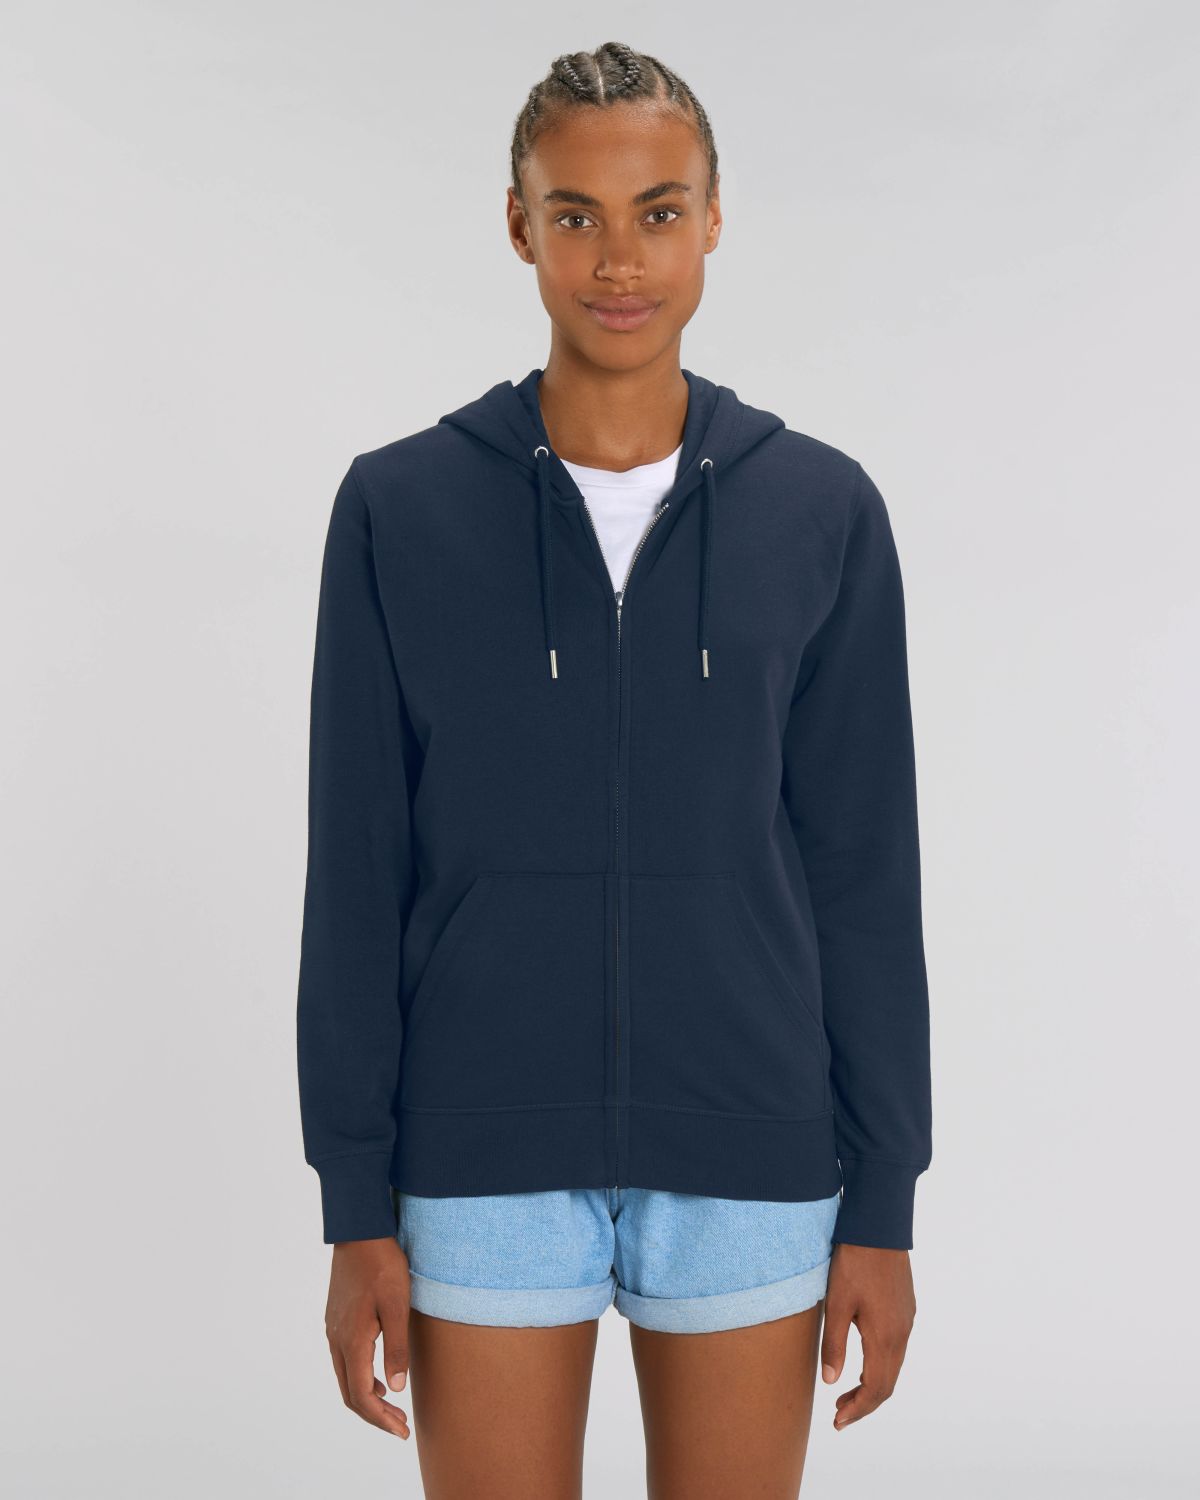 Stanley/Stella's - Connector Sweater (Zip) - French Navy